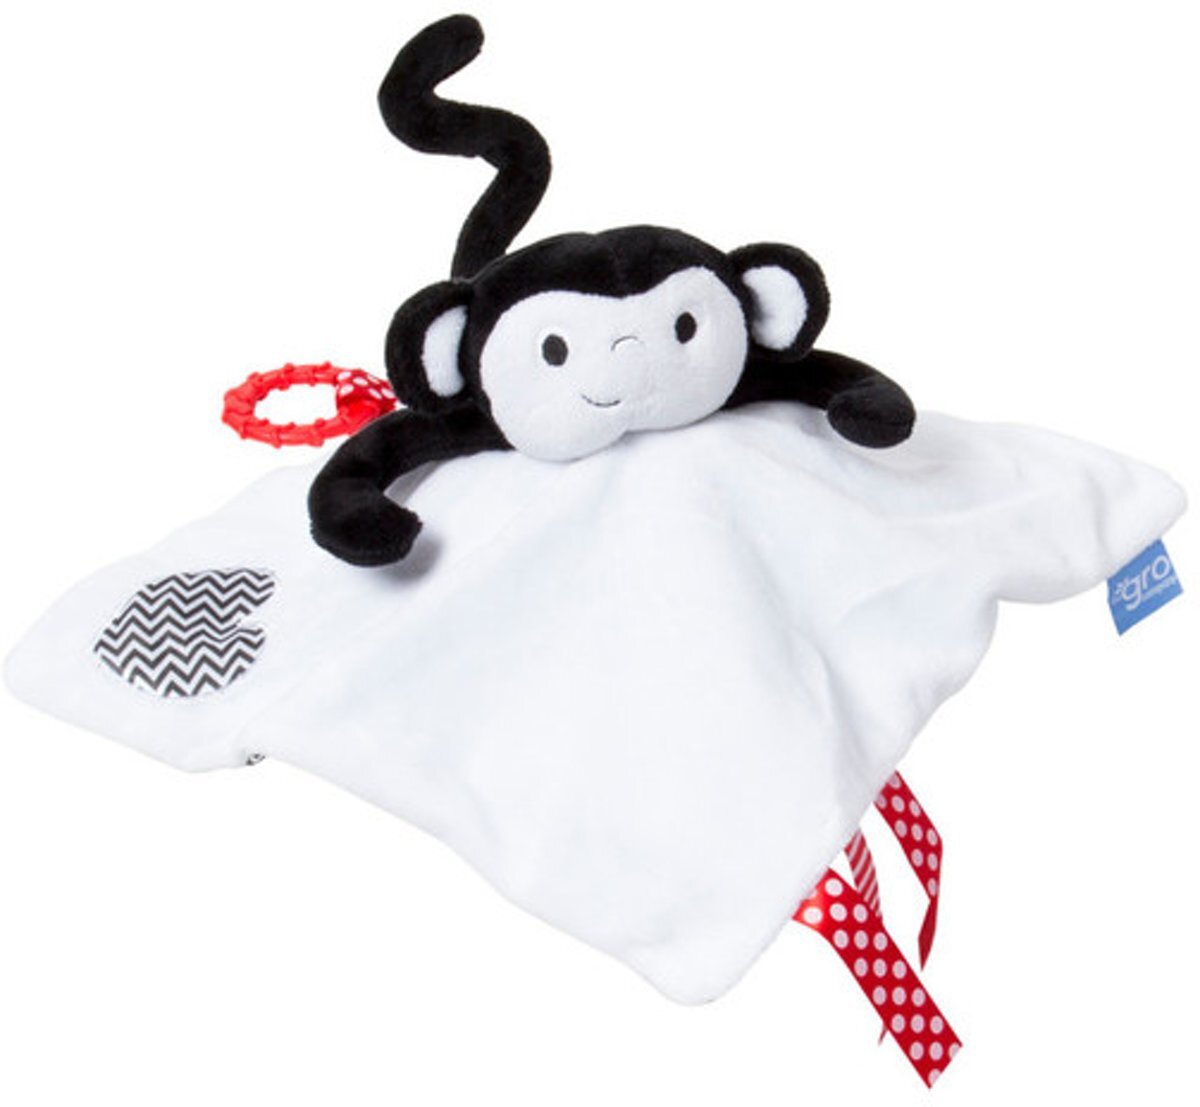 Tommee Tippee Tommee Tipppee Soft Comforter Marco the Monkey